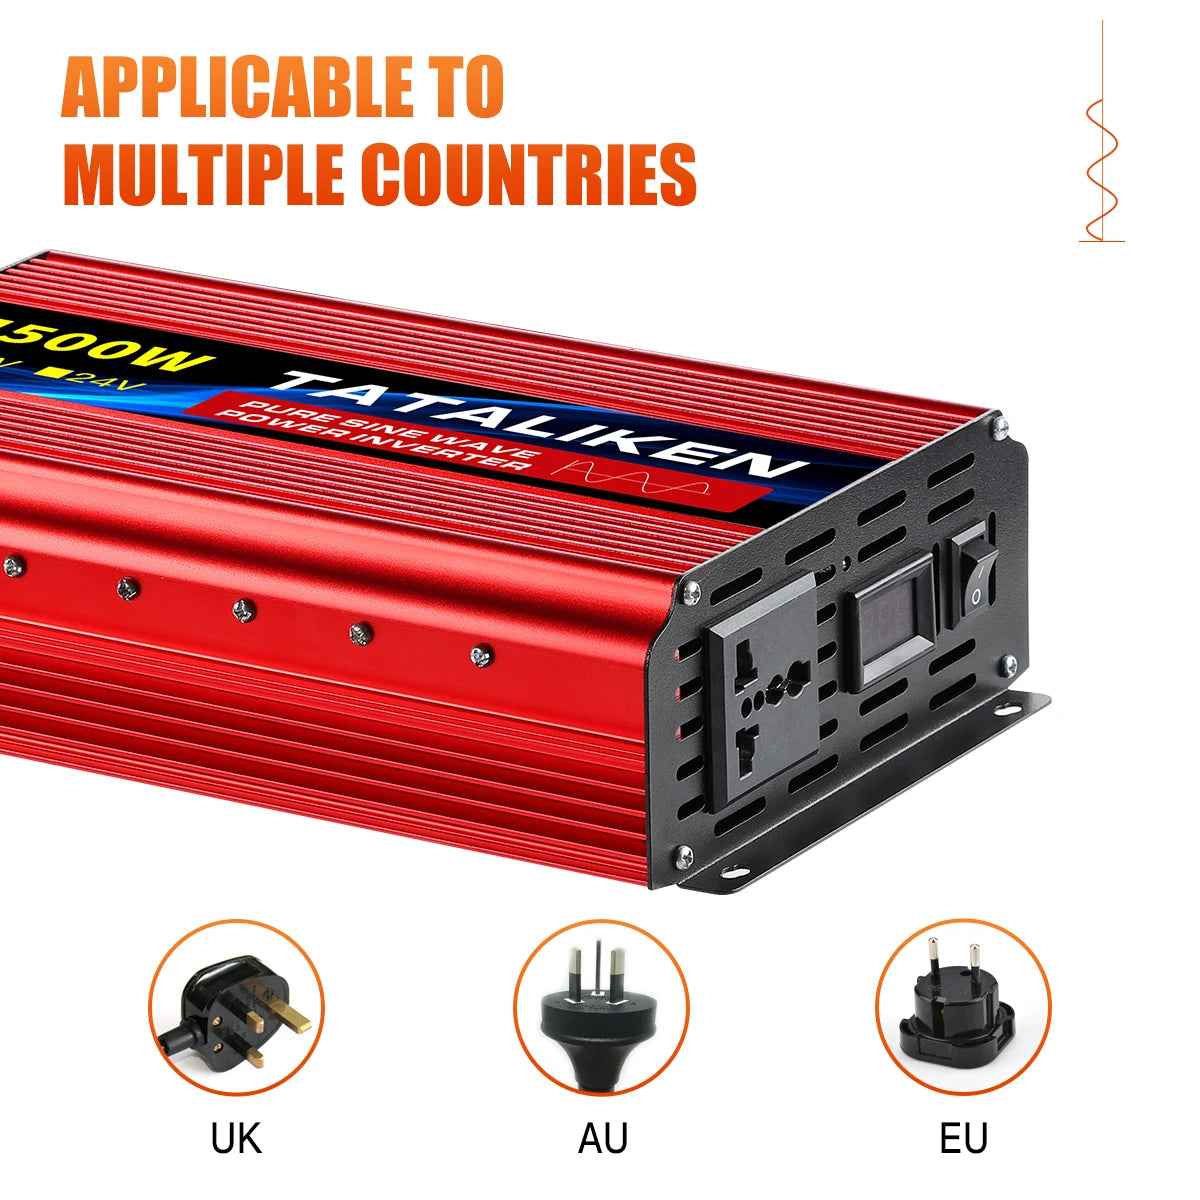 pure sine wave inverter, Global compliance: Meets regulations in UK, Australia, EU, USA, Canada, and more.